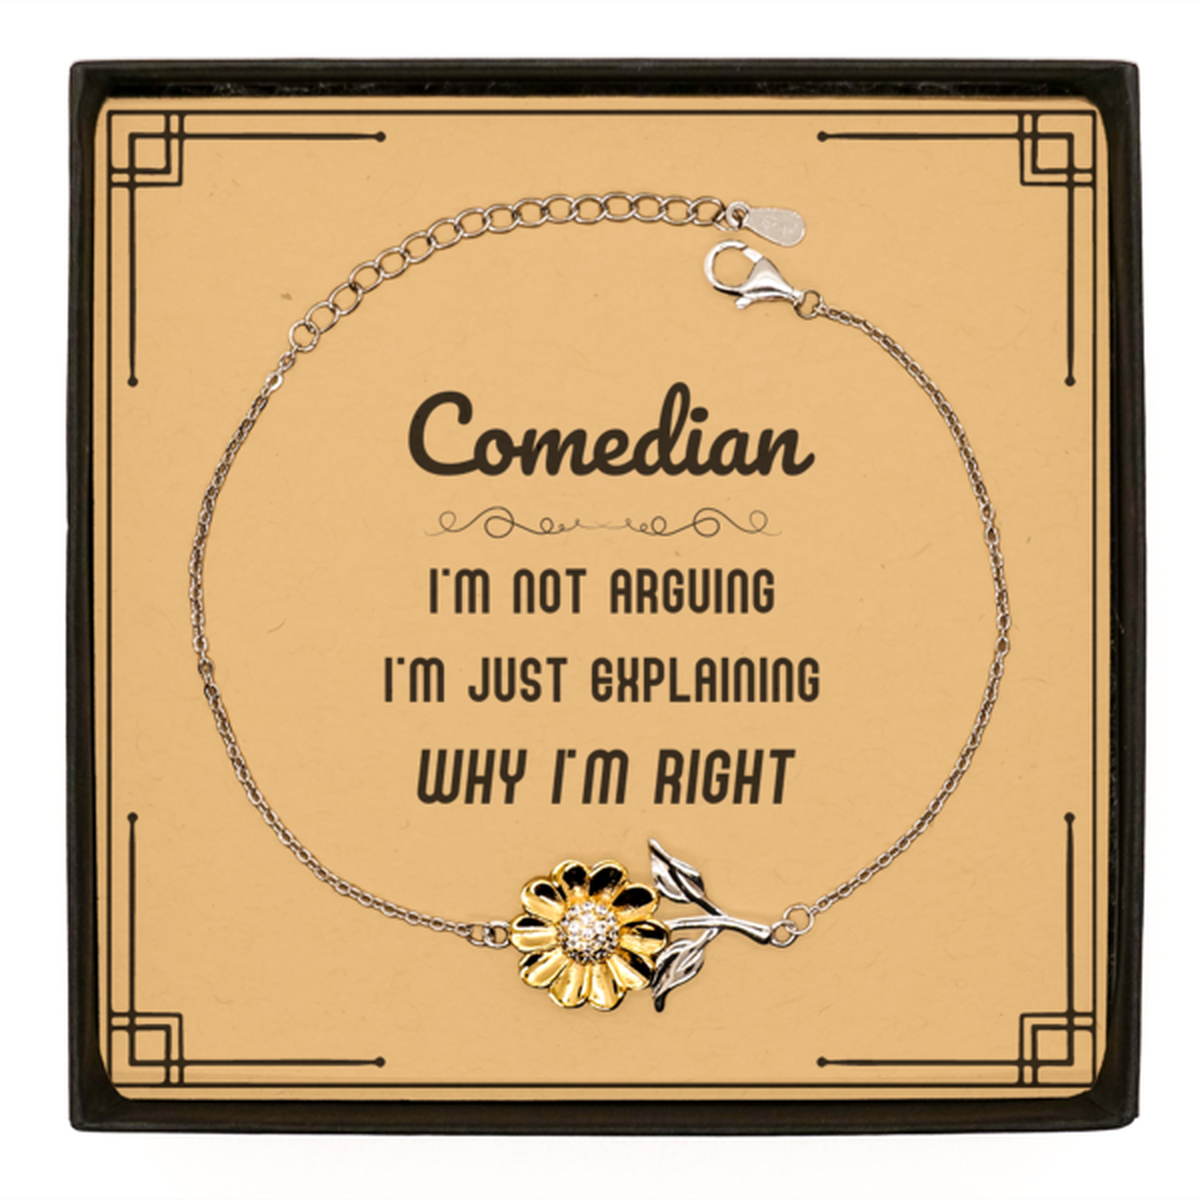 Comedian I'm not Arguing. I'm Just Explaining Why I'm RIGHT Sunflower Bracelet, Funny Saying Quote Comedian Gifts For Comedian Message Card Graduation Birthday Christmas Gifts for Men Women Coworker